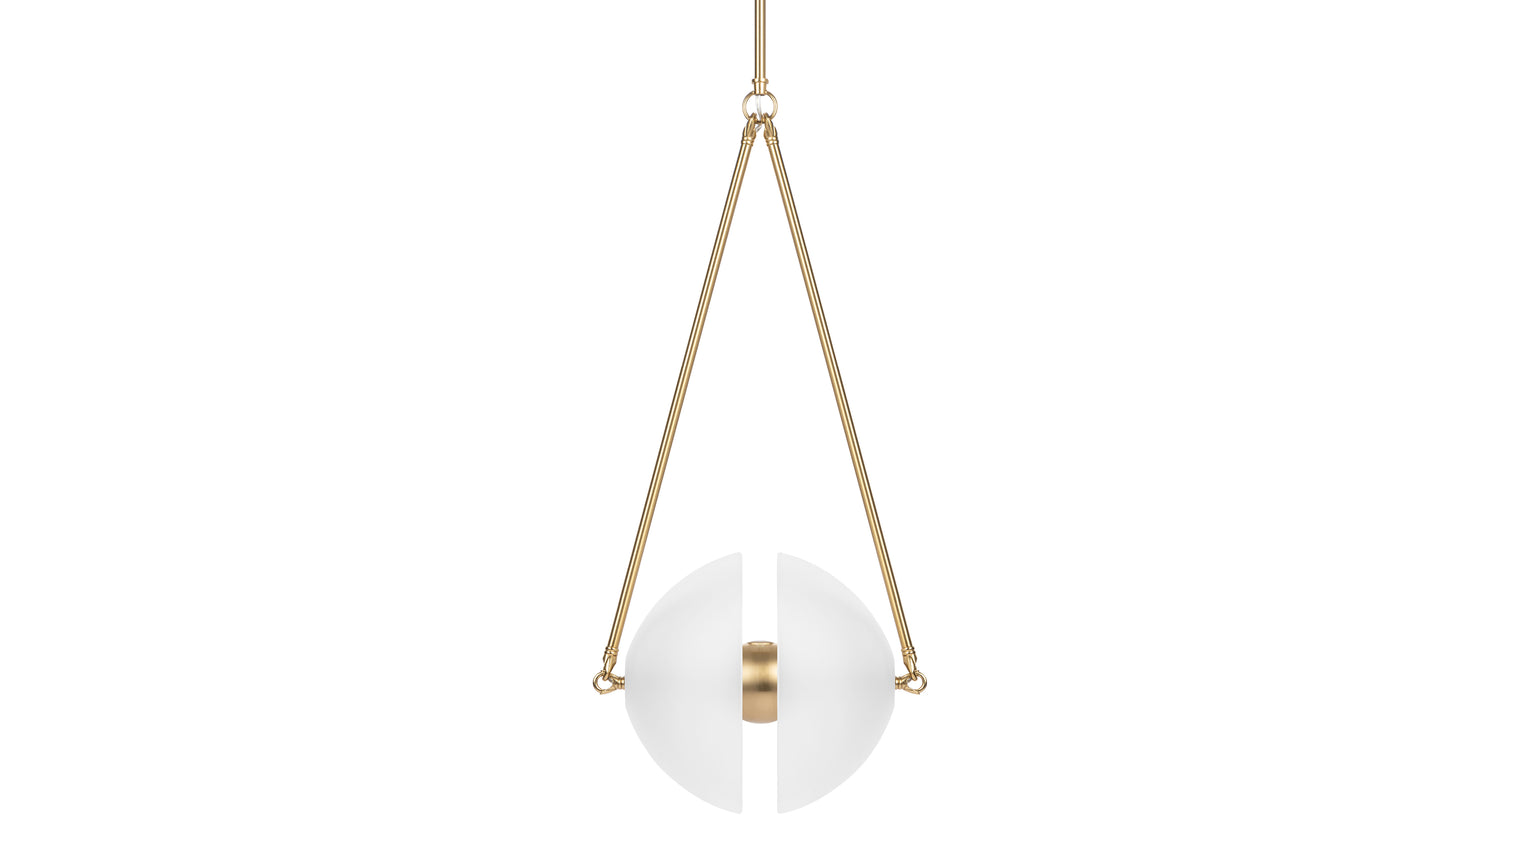 Radiant Brilliance | Inspired by the intricate connections found in neural networks, the Palla pendant features a delicate arrangement of glass suspended from a slender brass frame. The unique arrangement of the light creates a mesmerizing visual display.
